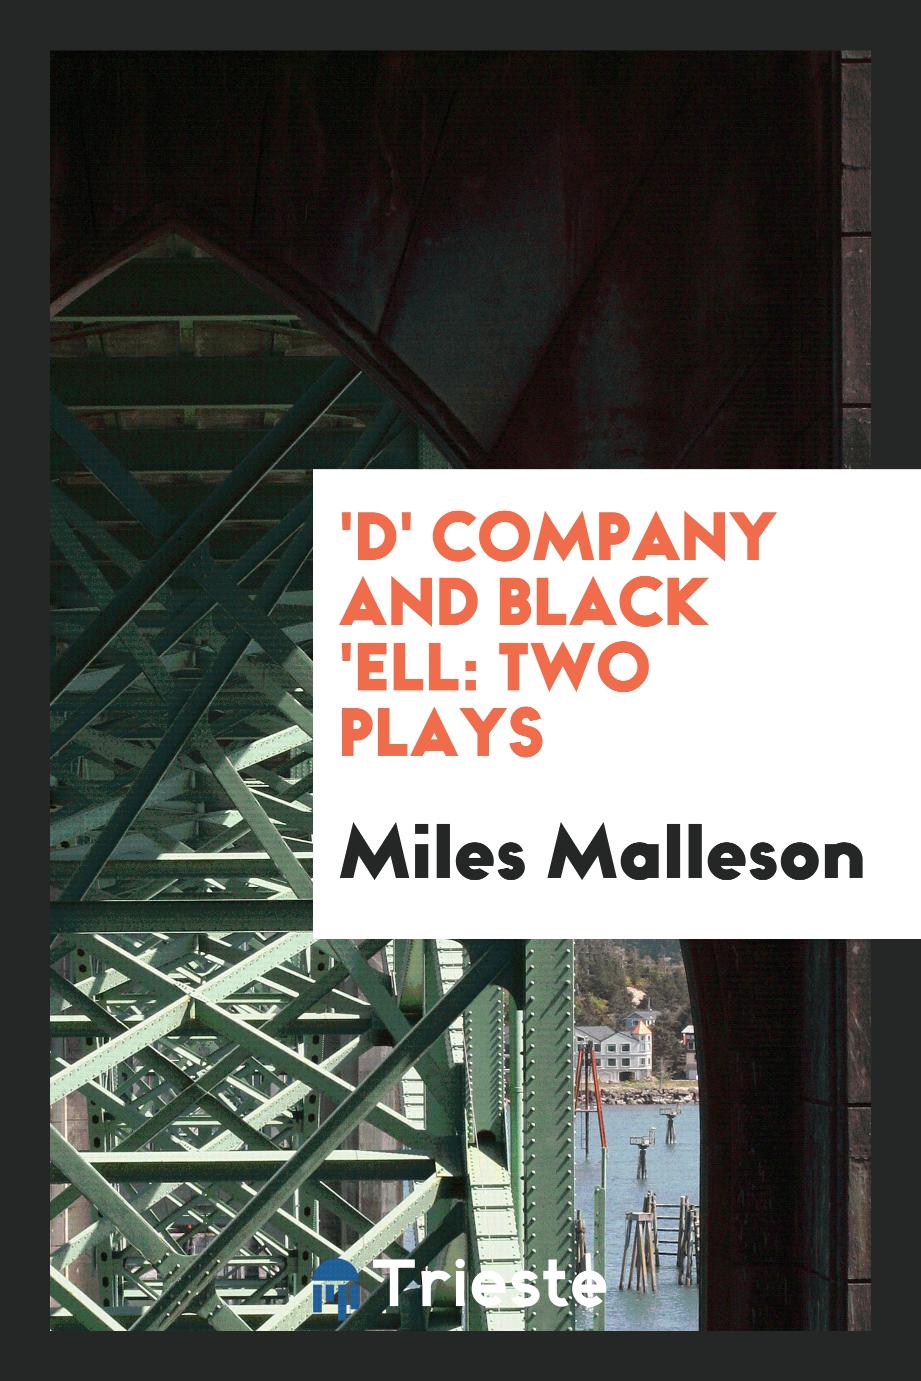 'D' company and Black 'ell: two plays